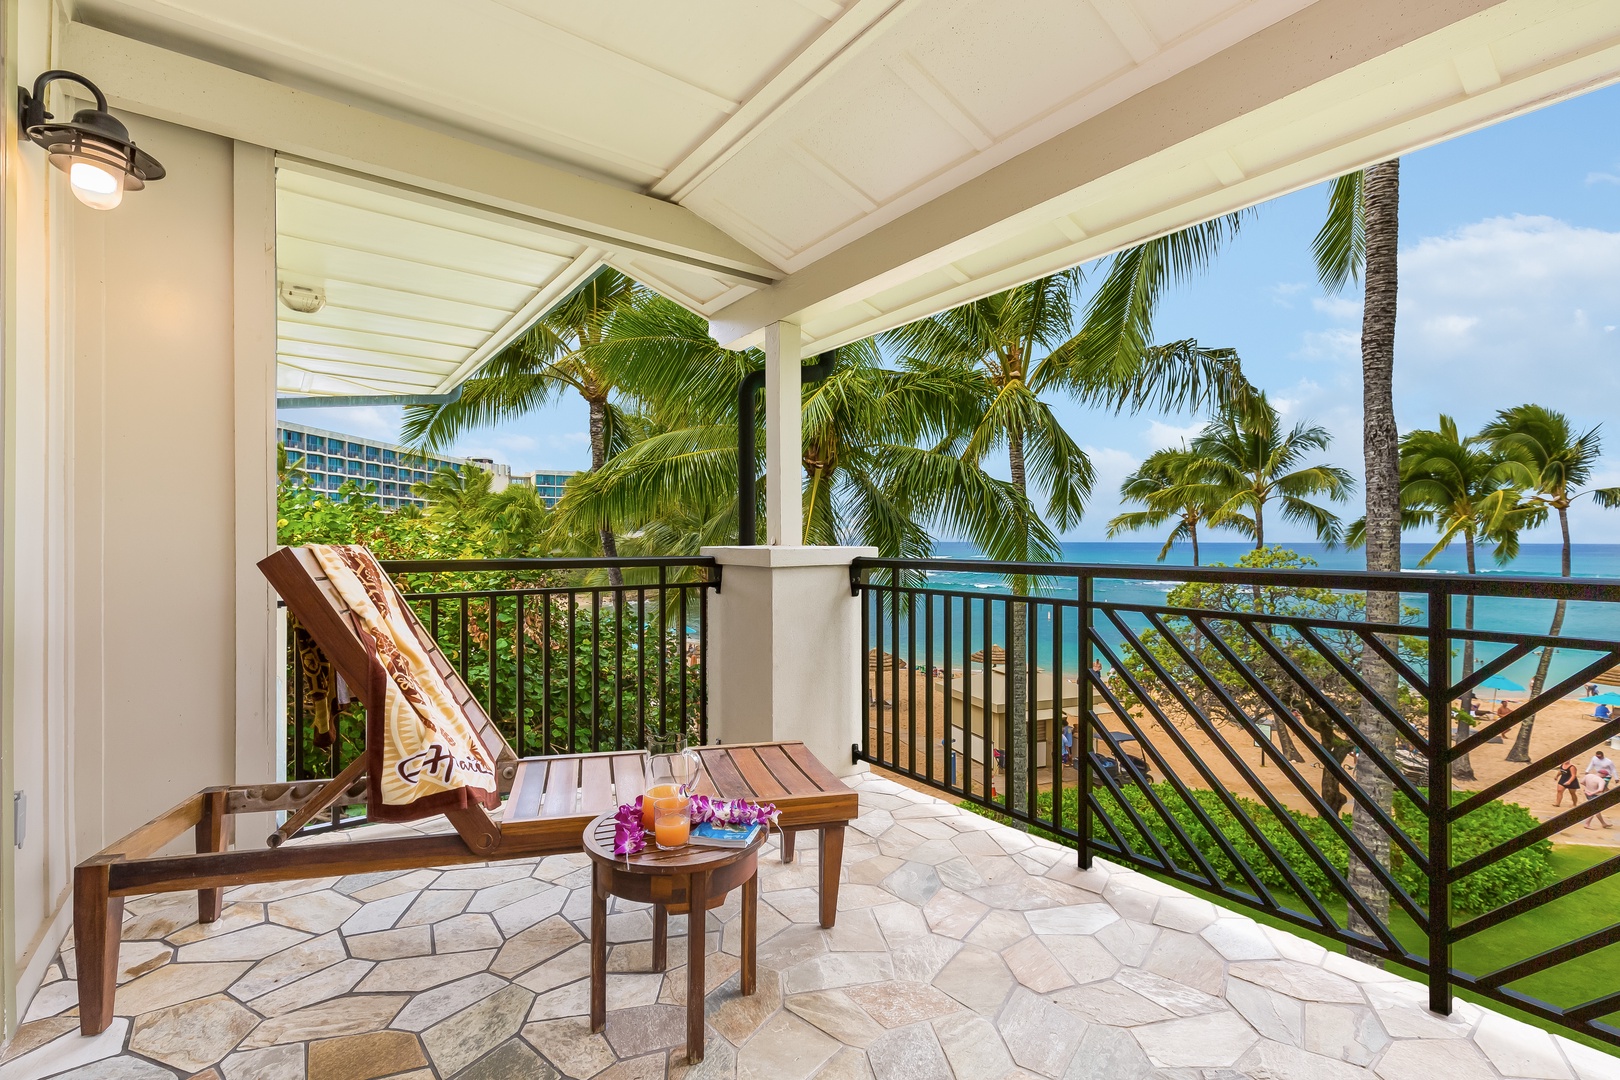 Kahuku Vacation Rentals, OFB Turtle Bay Villas 301 - Boasting the closest proximity to the 850-Acre Turtle Bay Resort and world-famous North Shore of Oahu, this spacious condo offers everything you’d desire for an unforgettable stay and the best ocean views from any 4-bedroom villa